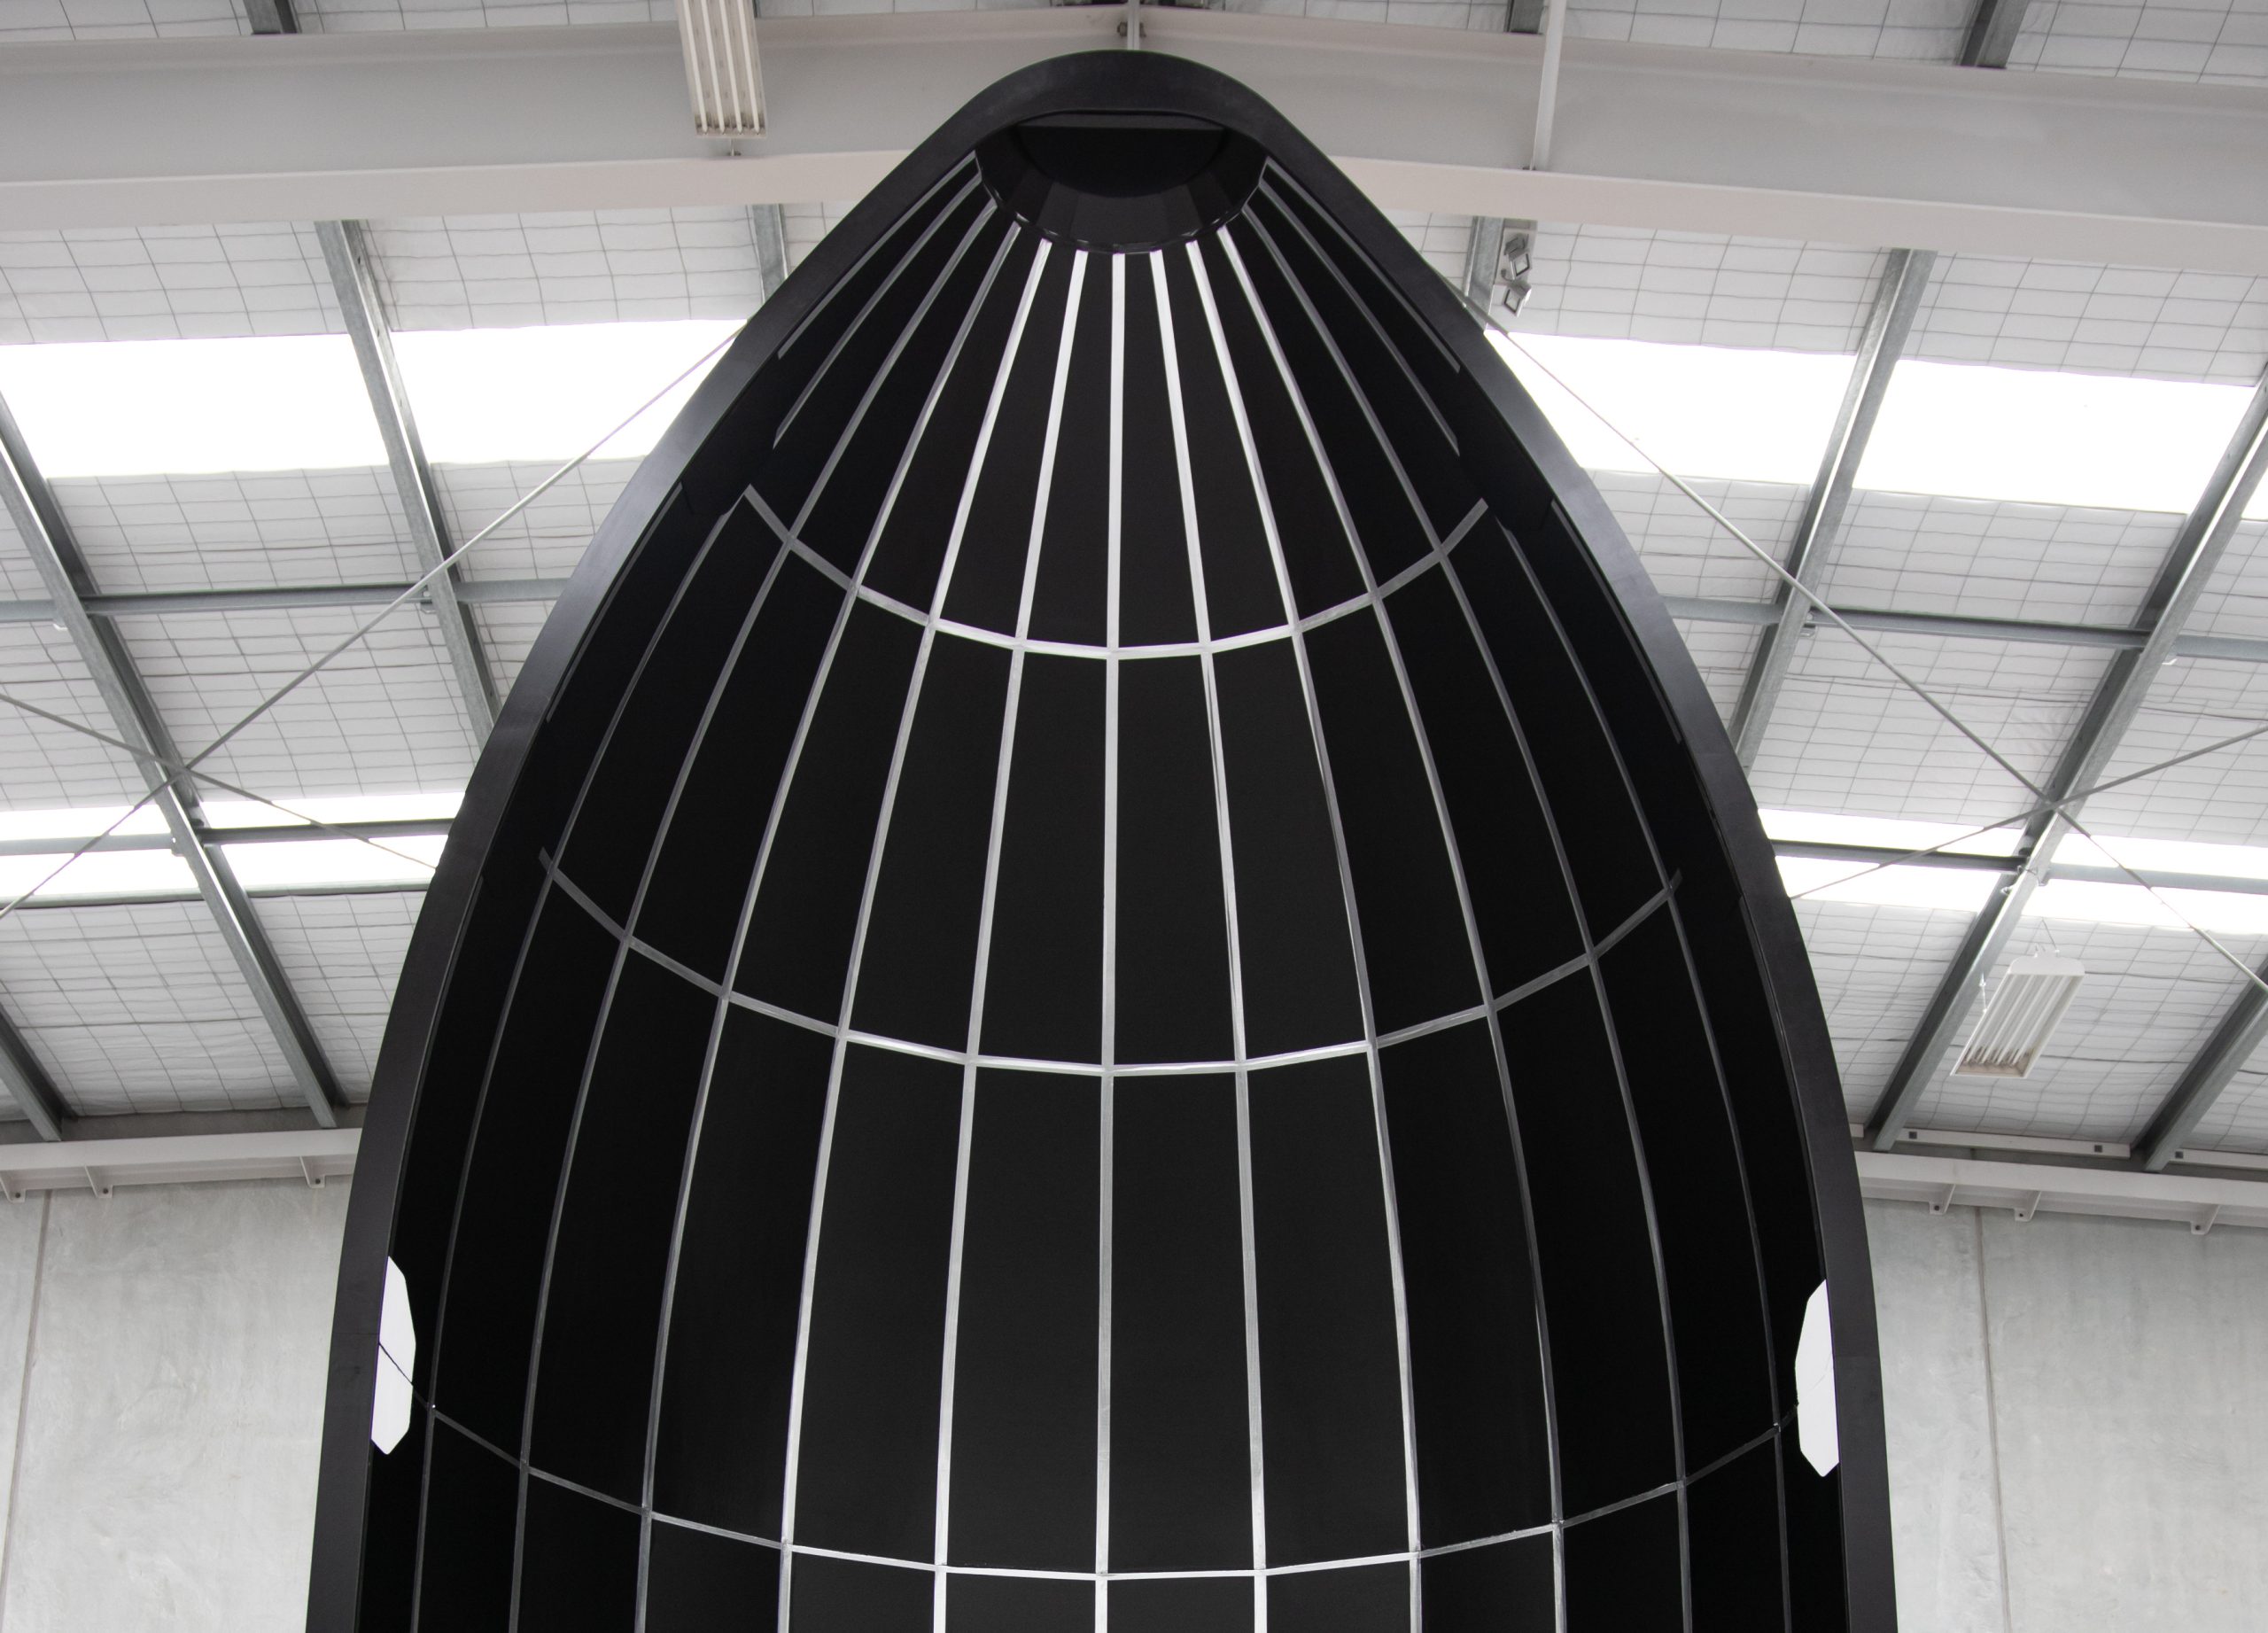 A prototype nose piece for Rocket Lab's upcoming Neutron rocket.